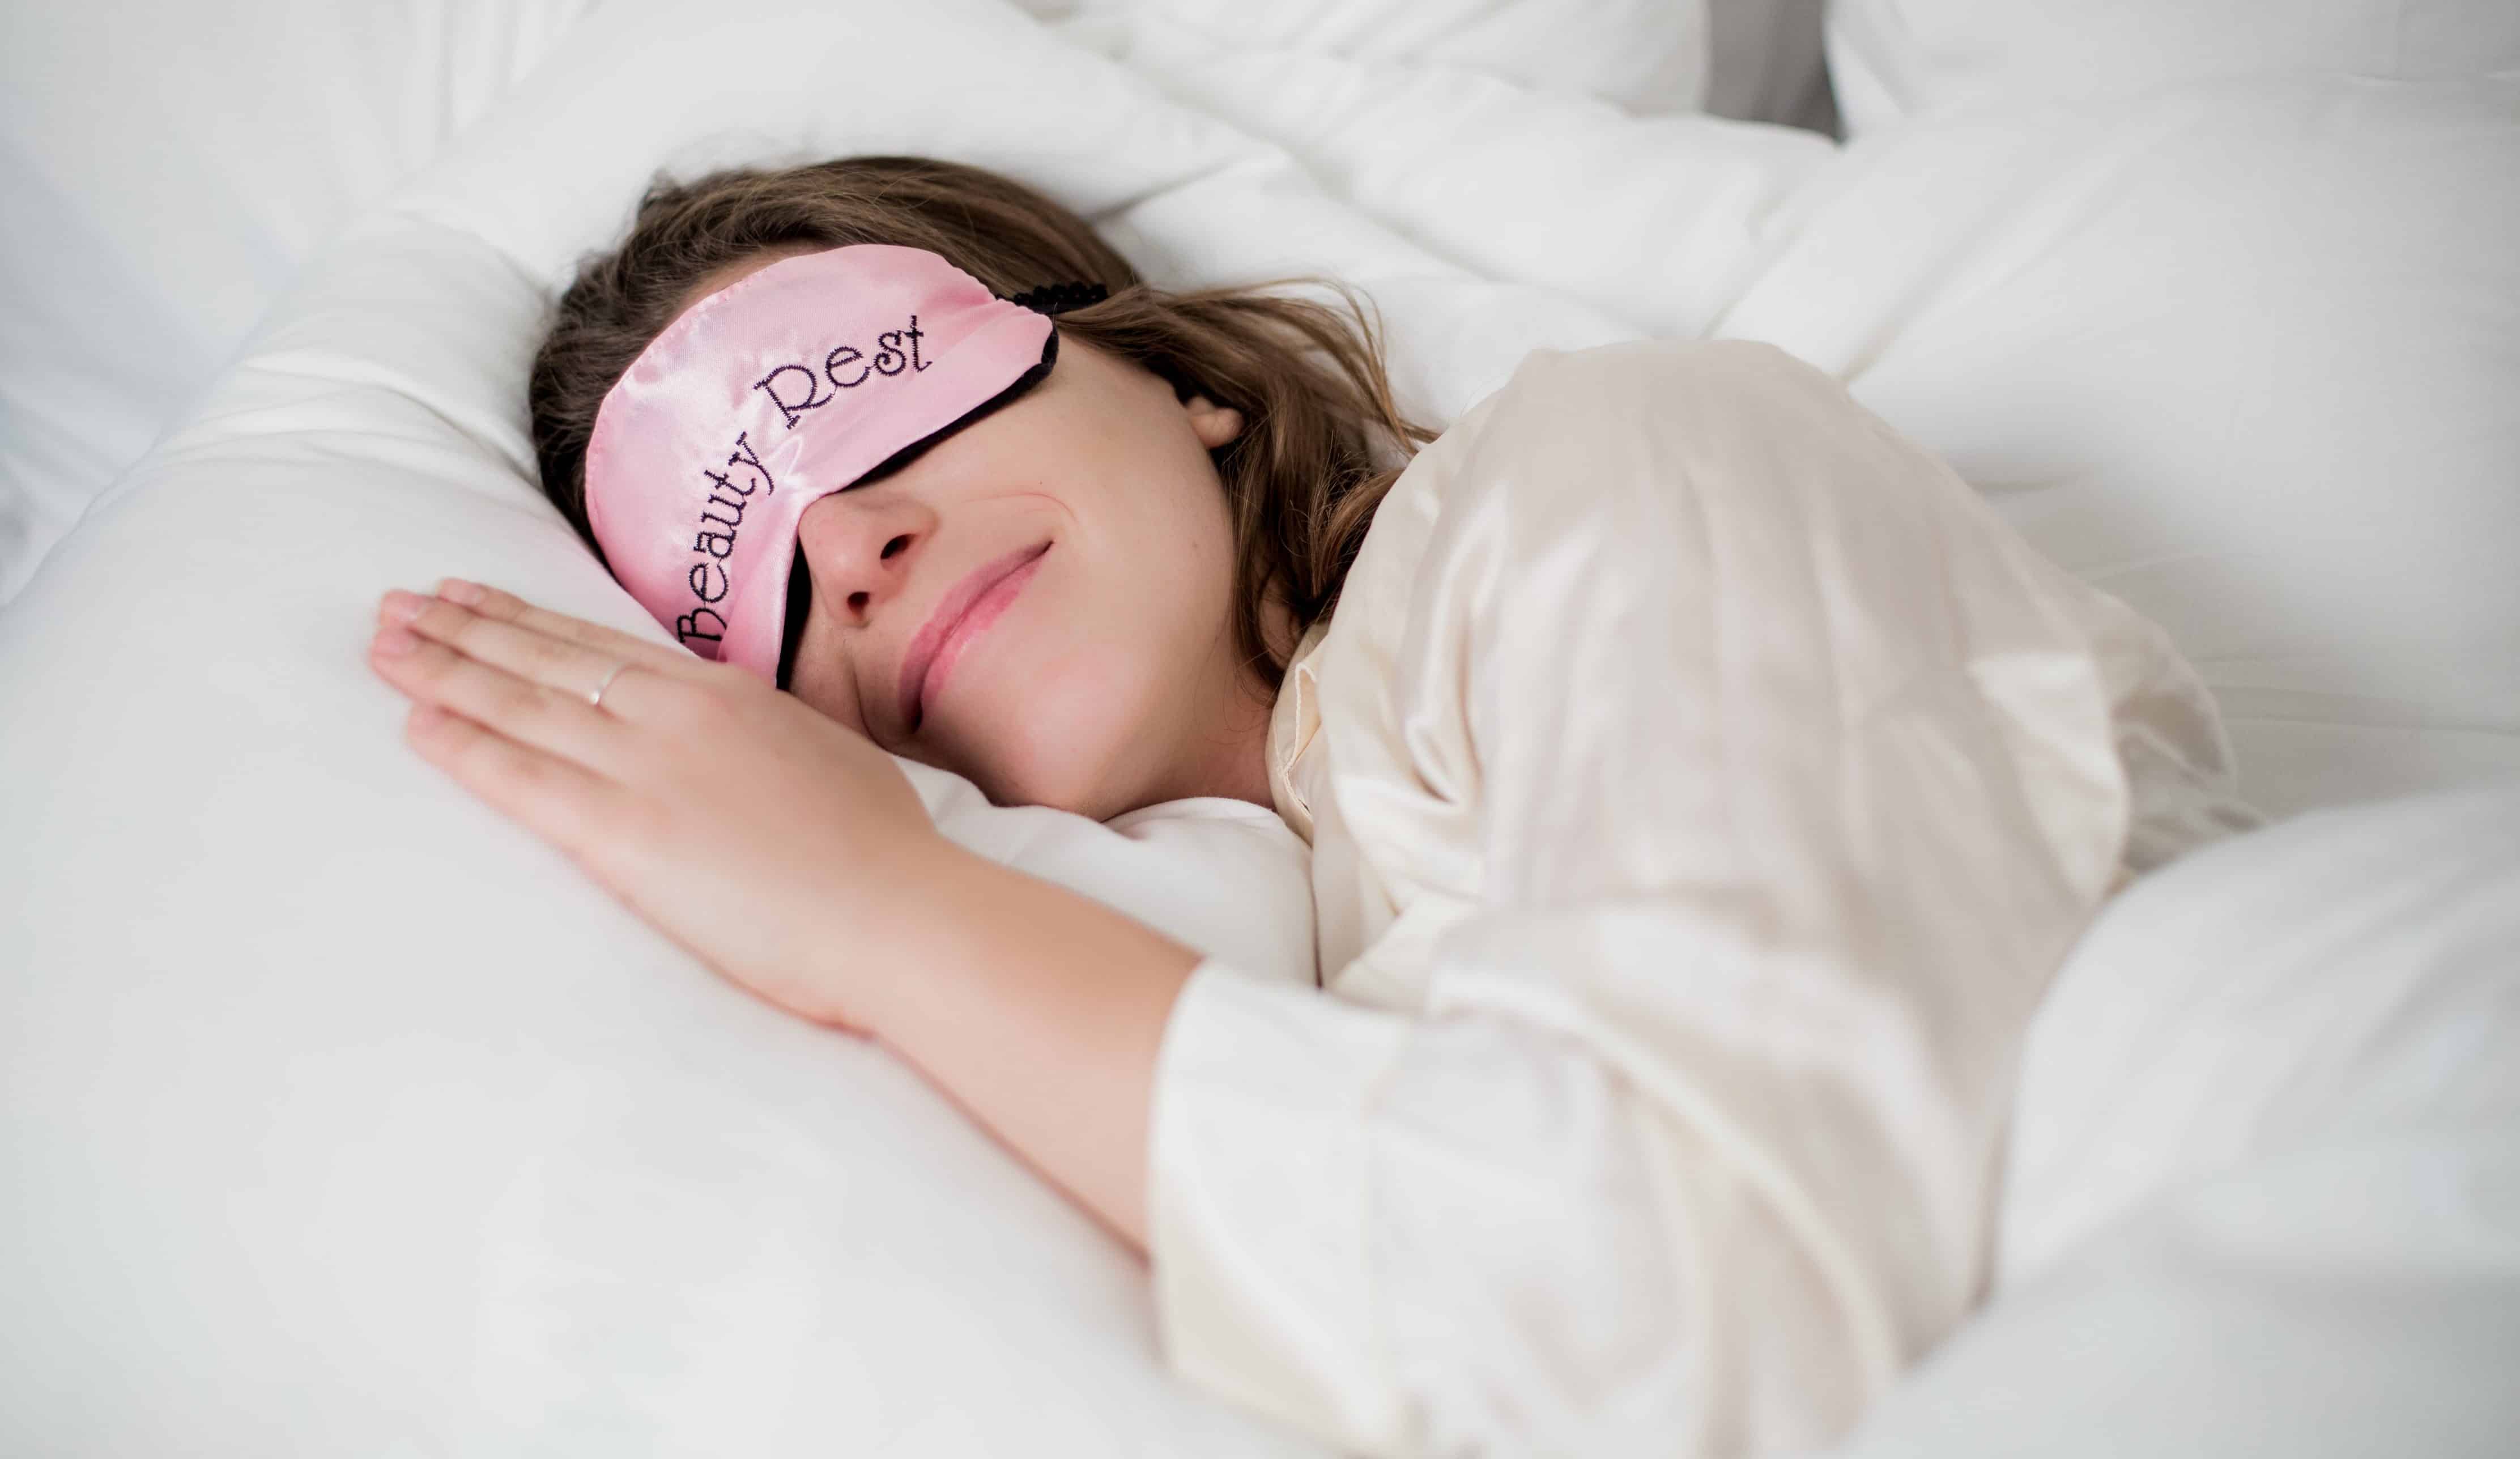 Why is Our Beauty Sleep Important?